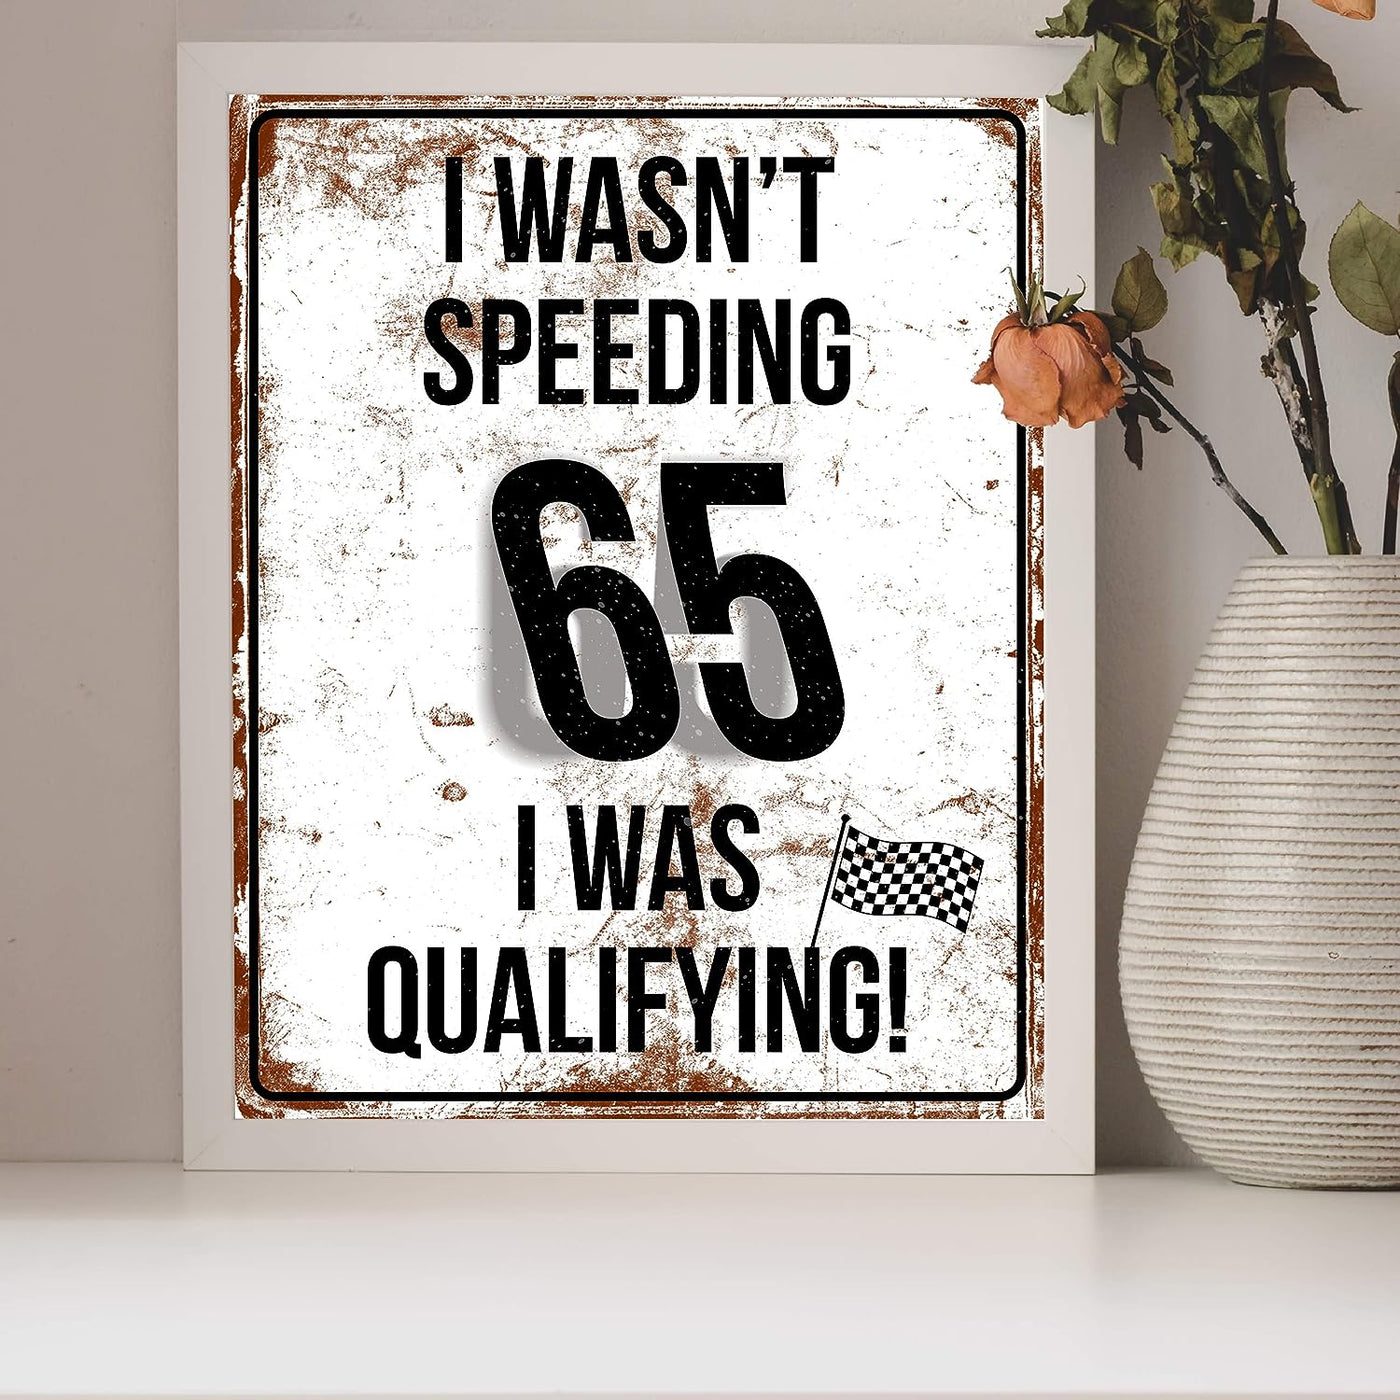 I Wasn't Speeding-I Was Qualifying-Funny Racing Wall Sign -8 x 10"- Distressed Speed Limit Print-Ready to Frame. Home-Office Decor. Great Addition to Man Cave-Bar-Garage. Perfect Gift for Racers!